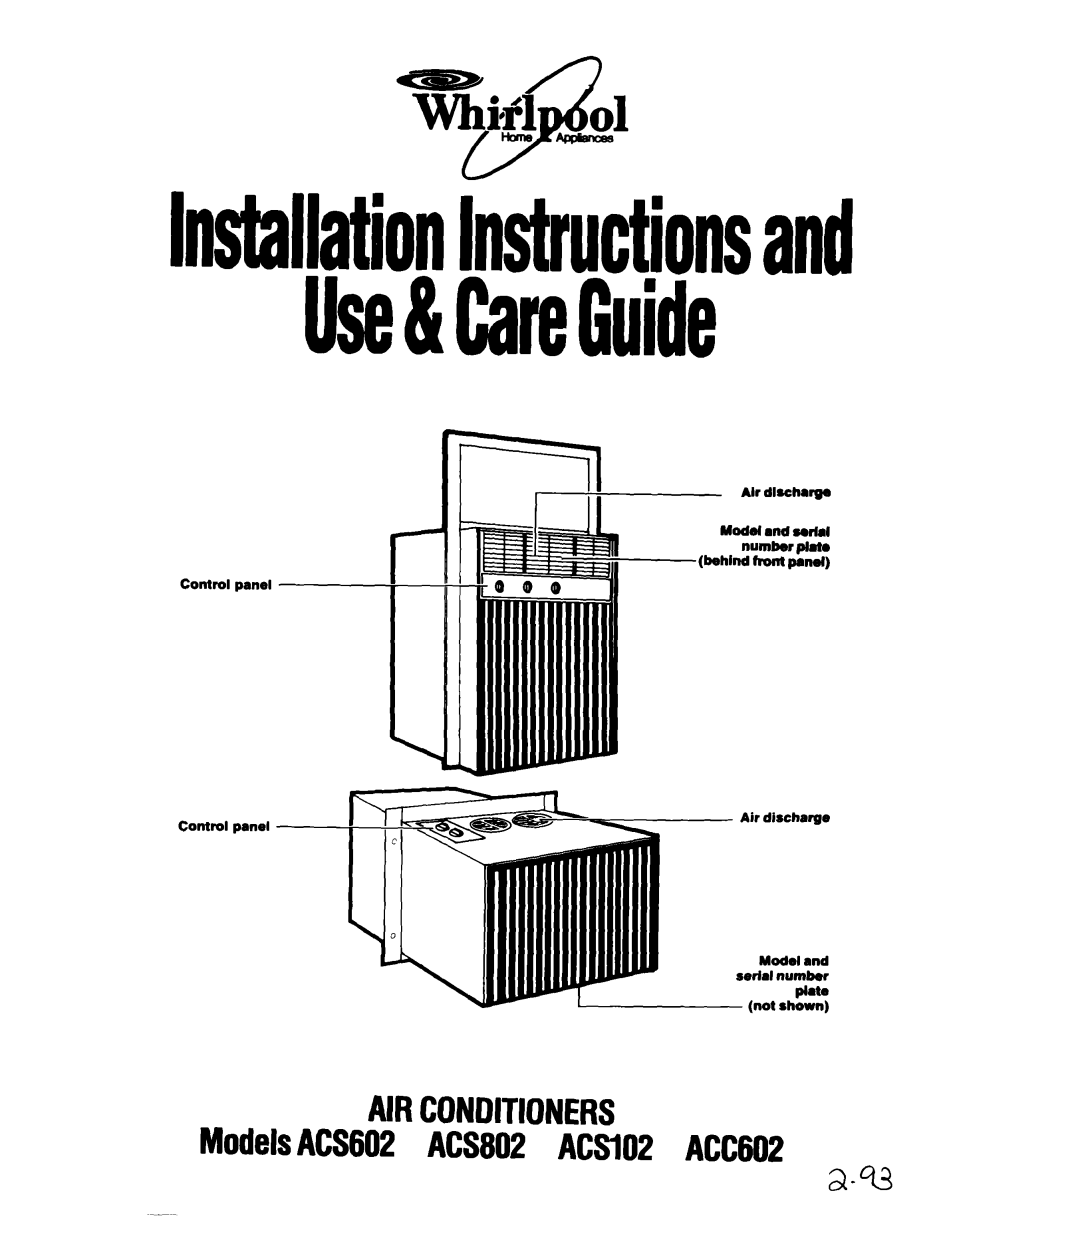 Whirlpool ACSLOP manual T&+1, InstallationhiLtionsand UseMareGuide, AIRCONDITIONERS ModelsACS602 ACS802 ACSlOP ACC602 